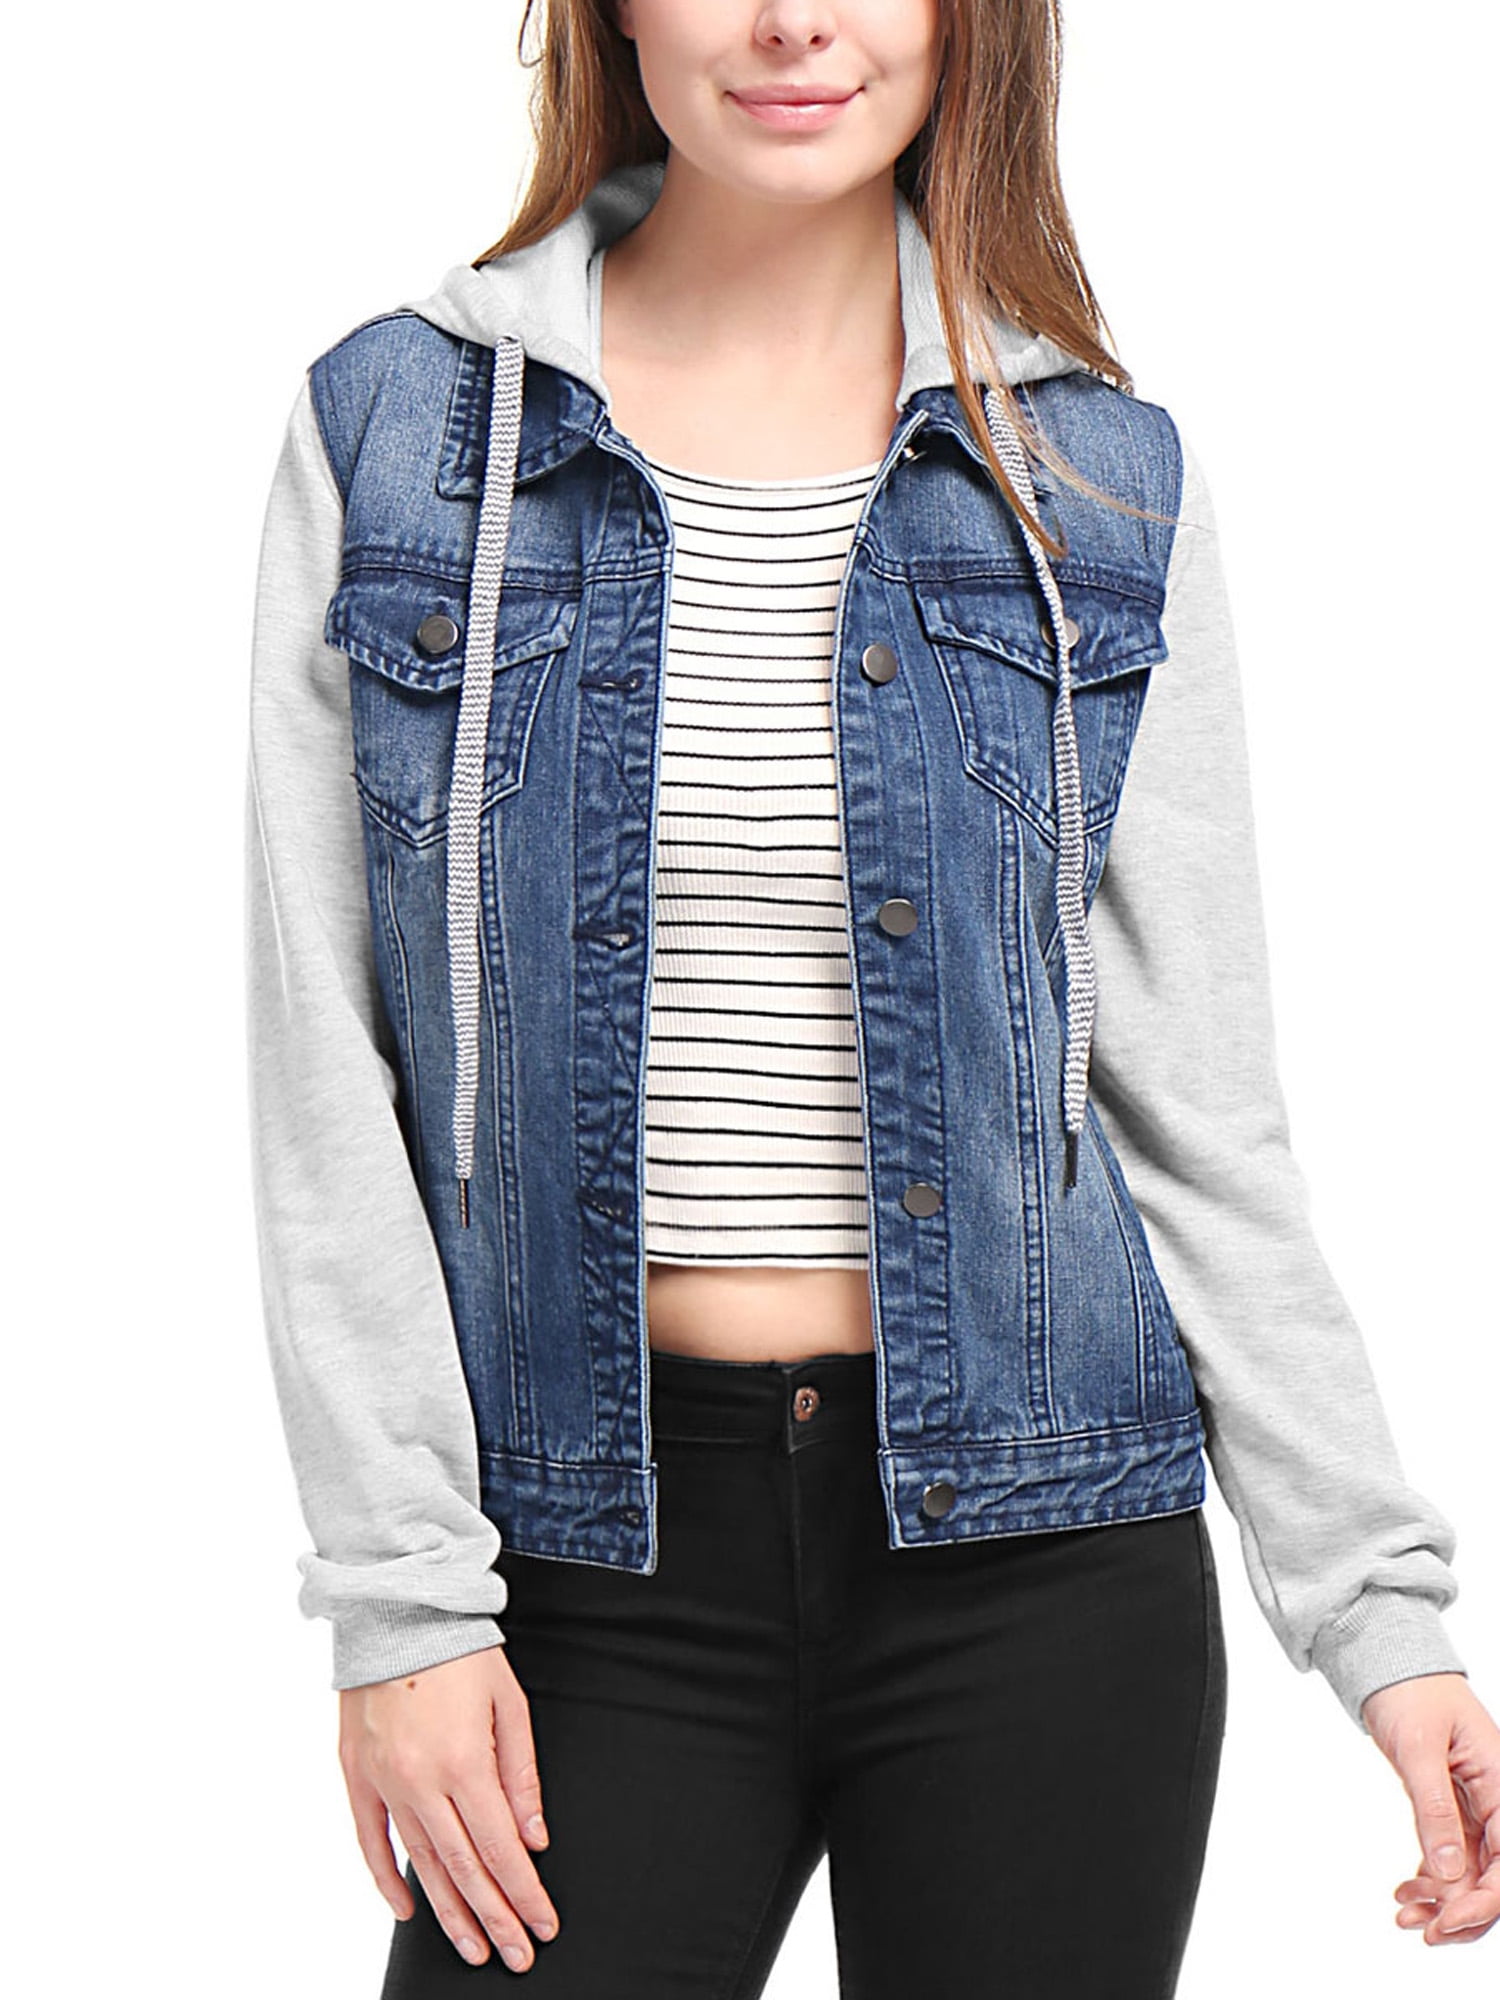 Buy LifeShe Women's denim jacket with hood oversized distressed jean  jackets hoodie, Blue, Small at Amazon.in